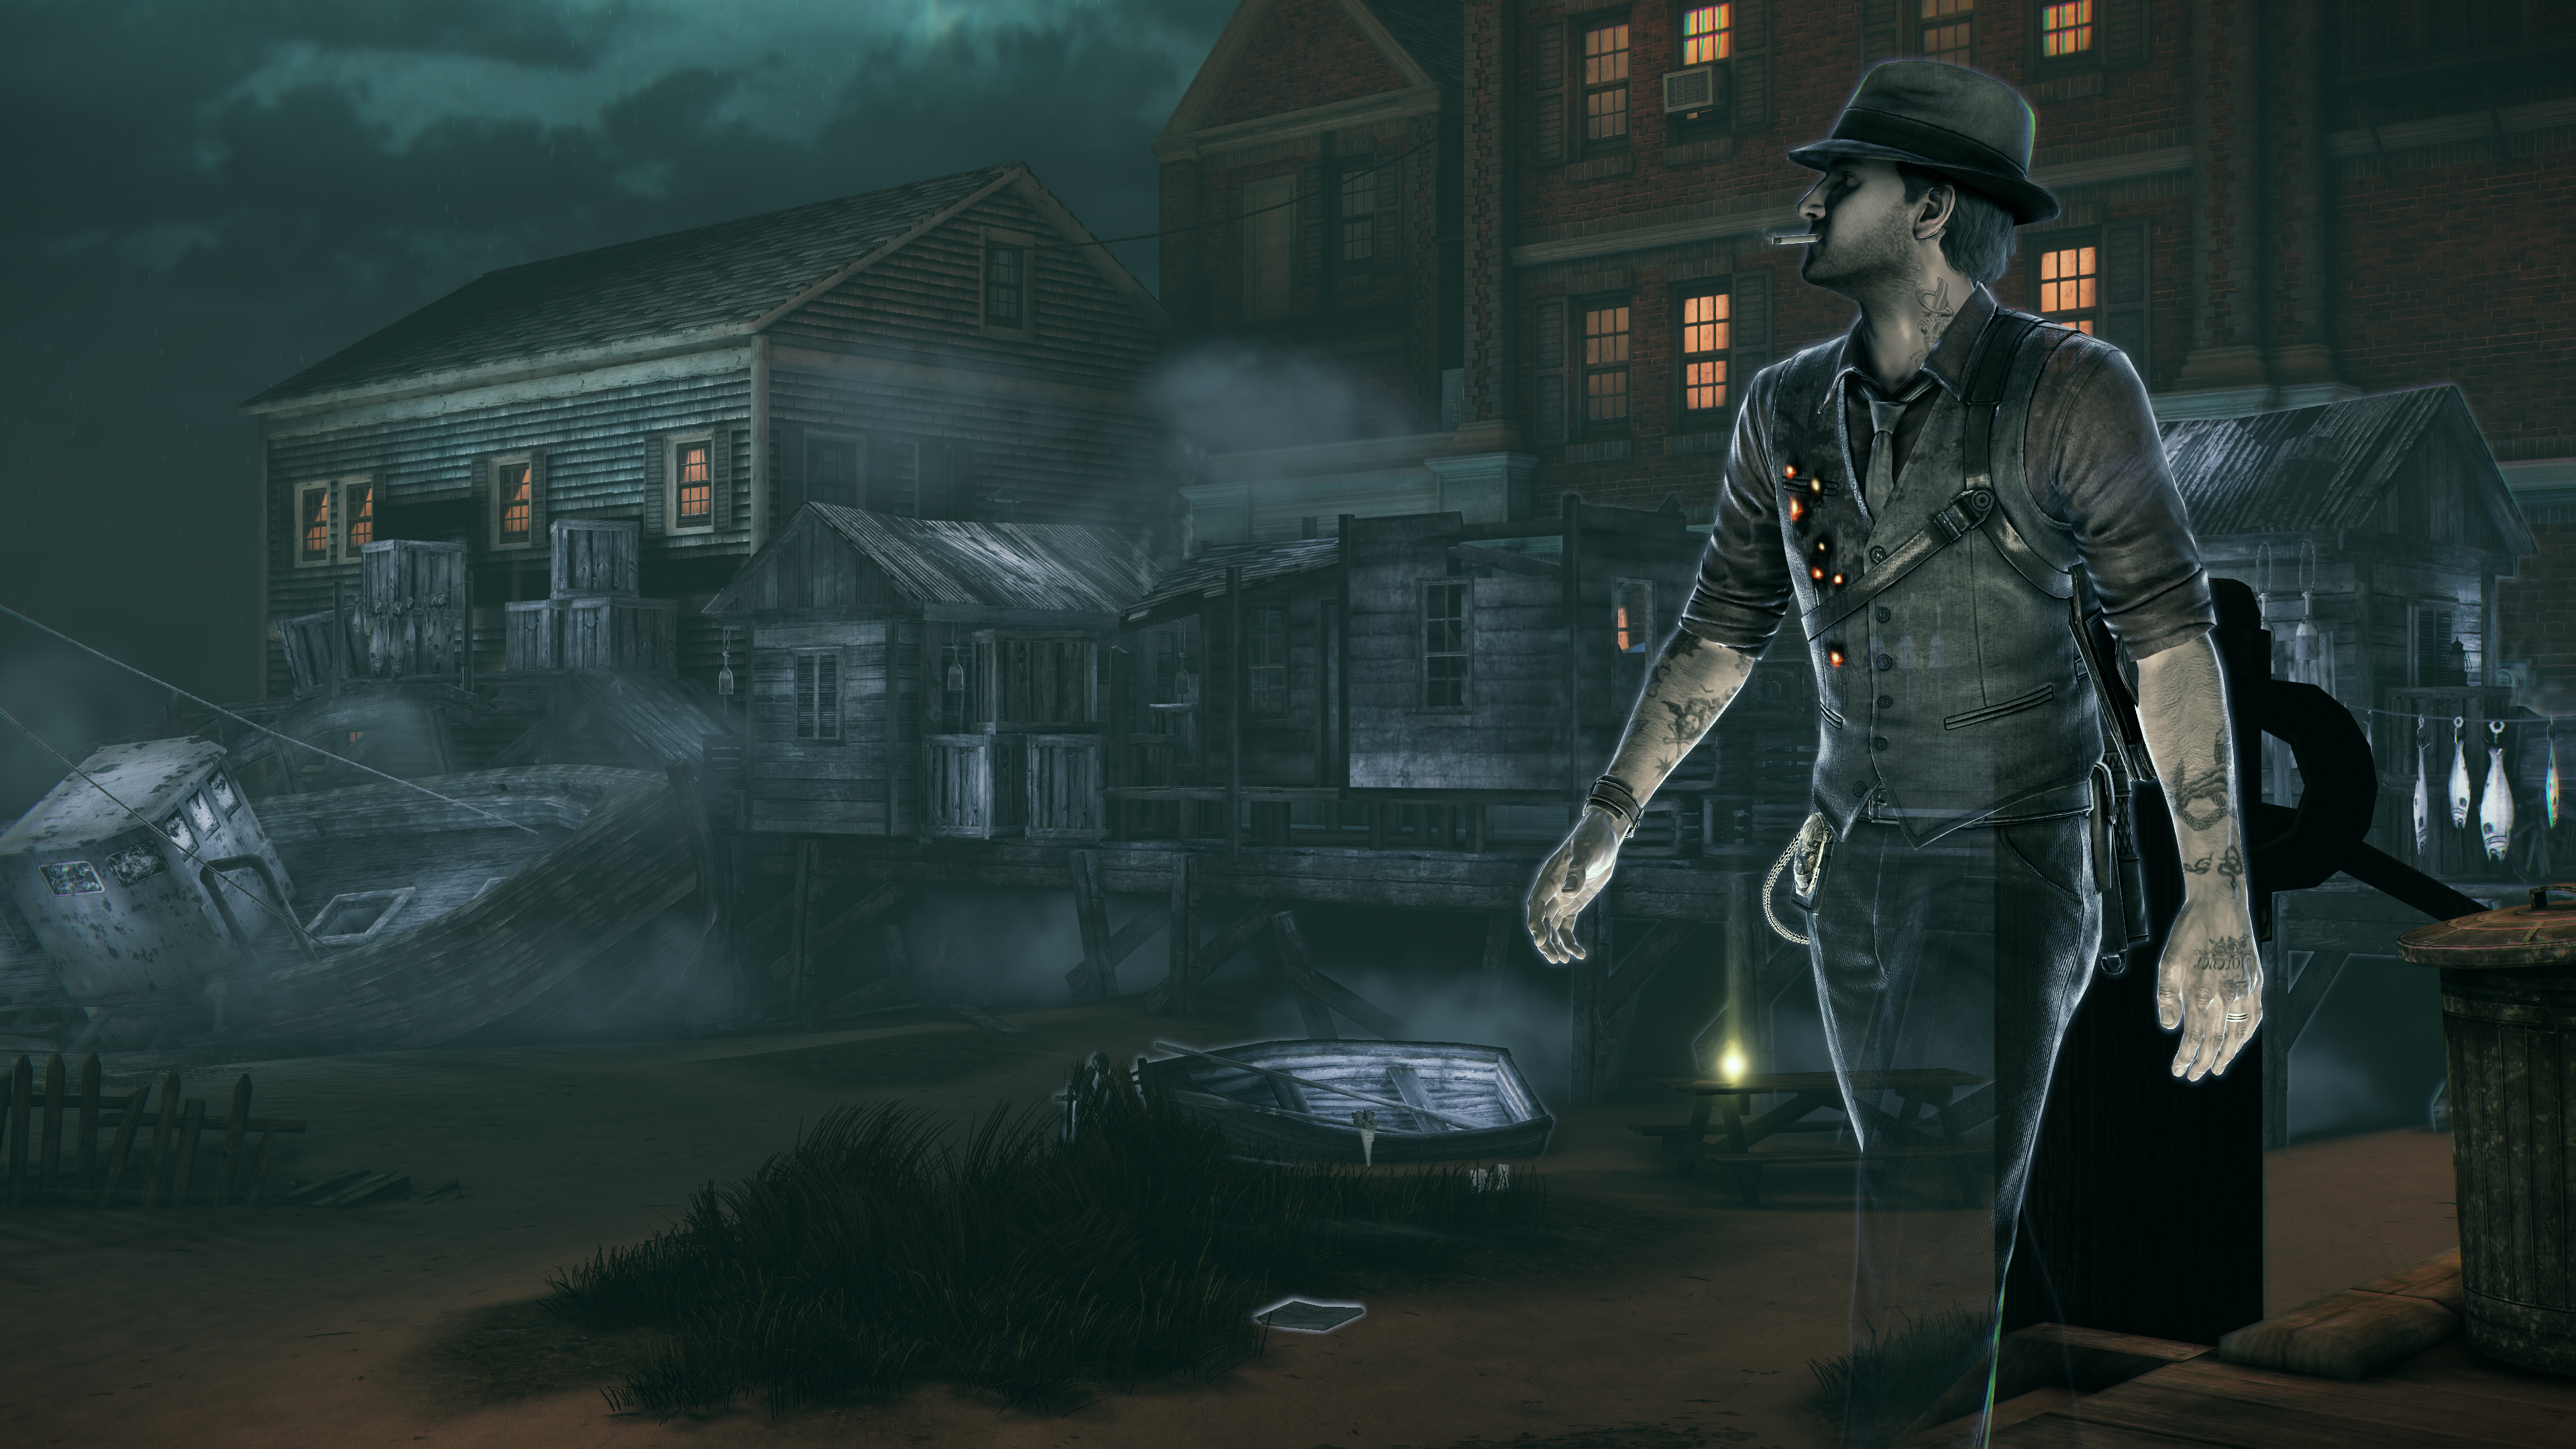 Murdered: Soul Suspect wallpaper, Video Game, HQ Murdered: Soul Suspect pictureK Wallpaper 2019